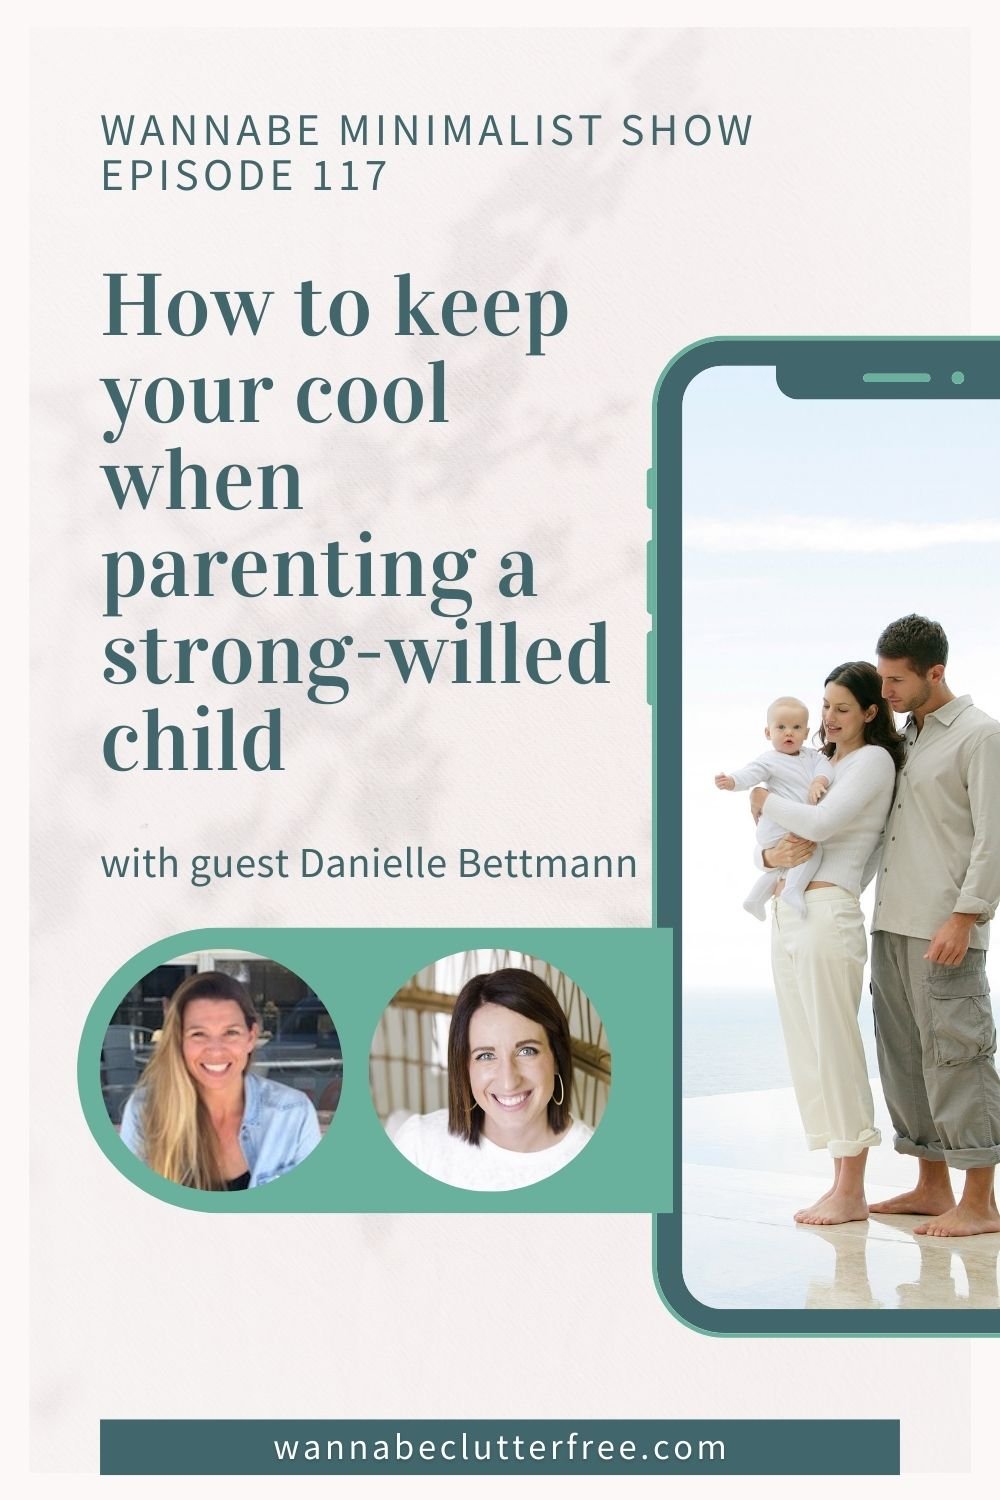 How to keep your cool when parenting a strong-willed child